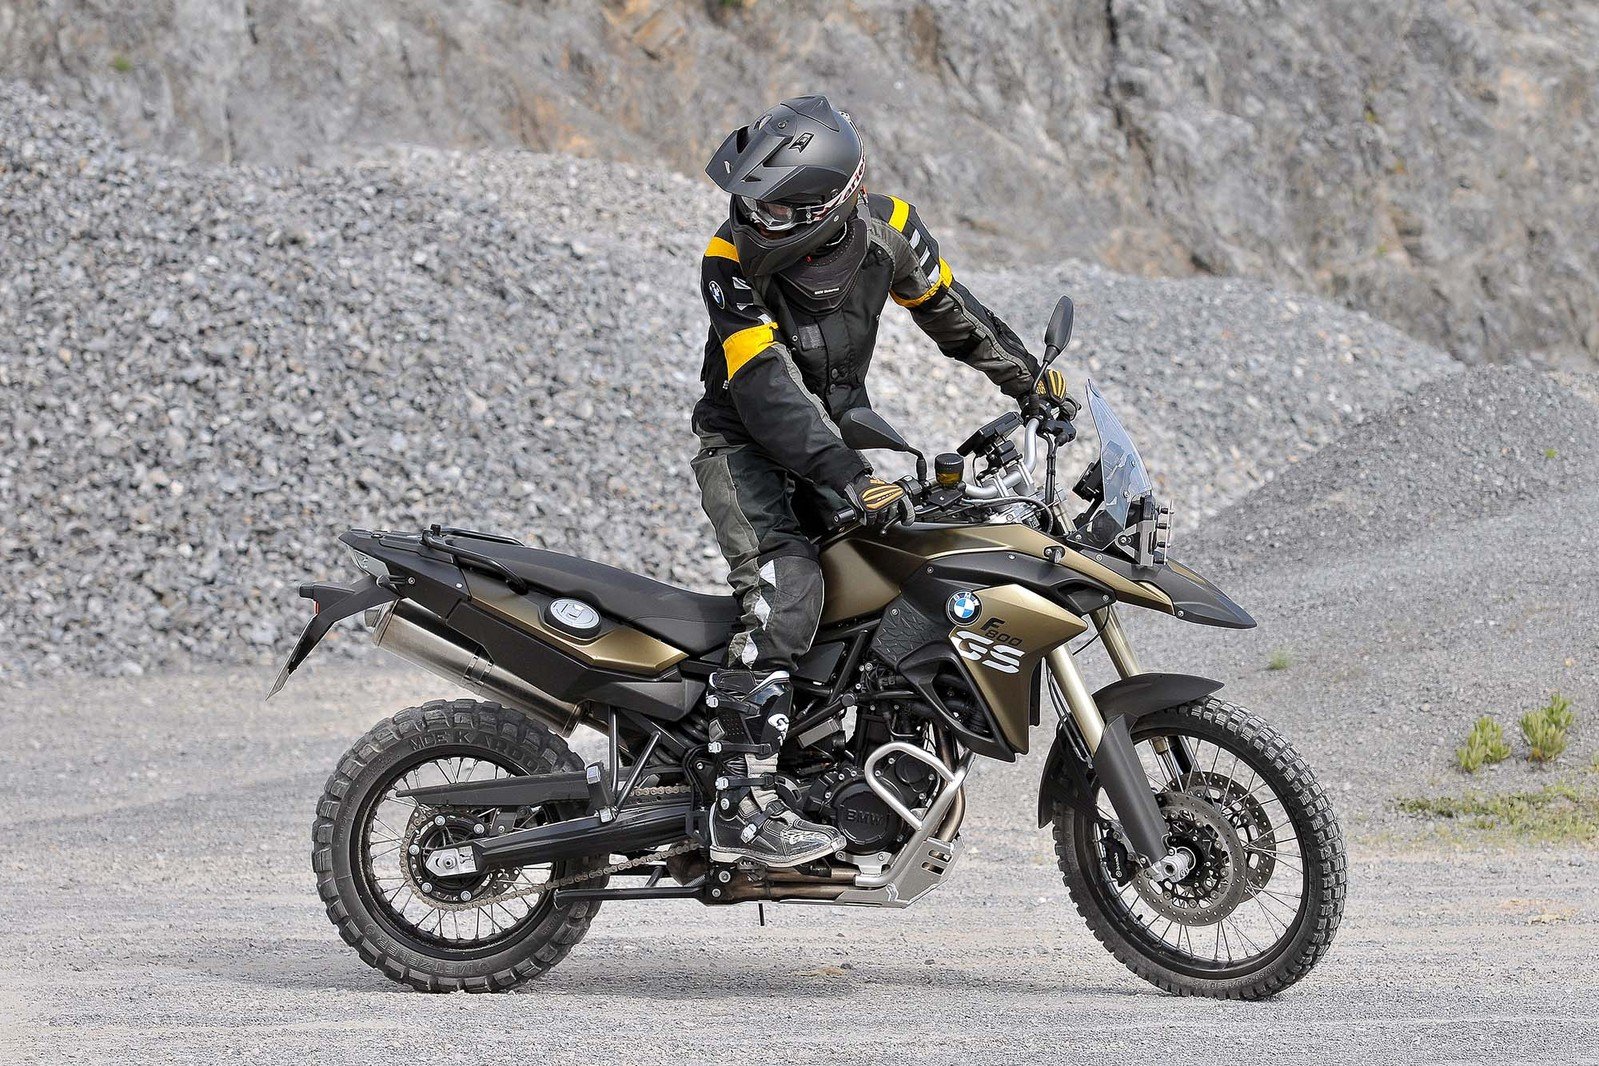 Amazing BMW F800GS Pictures & Backgrounds